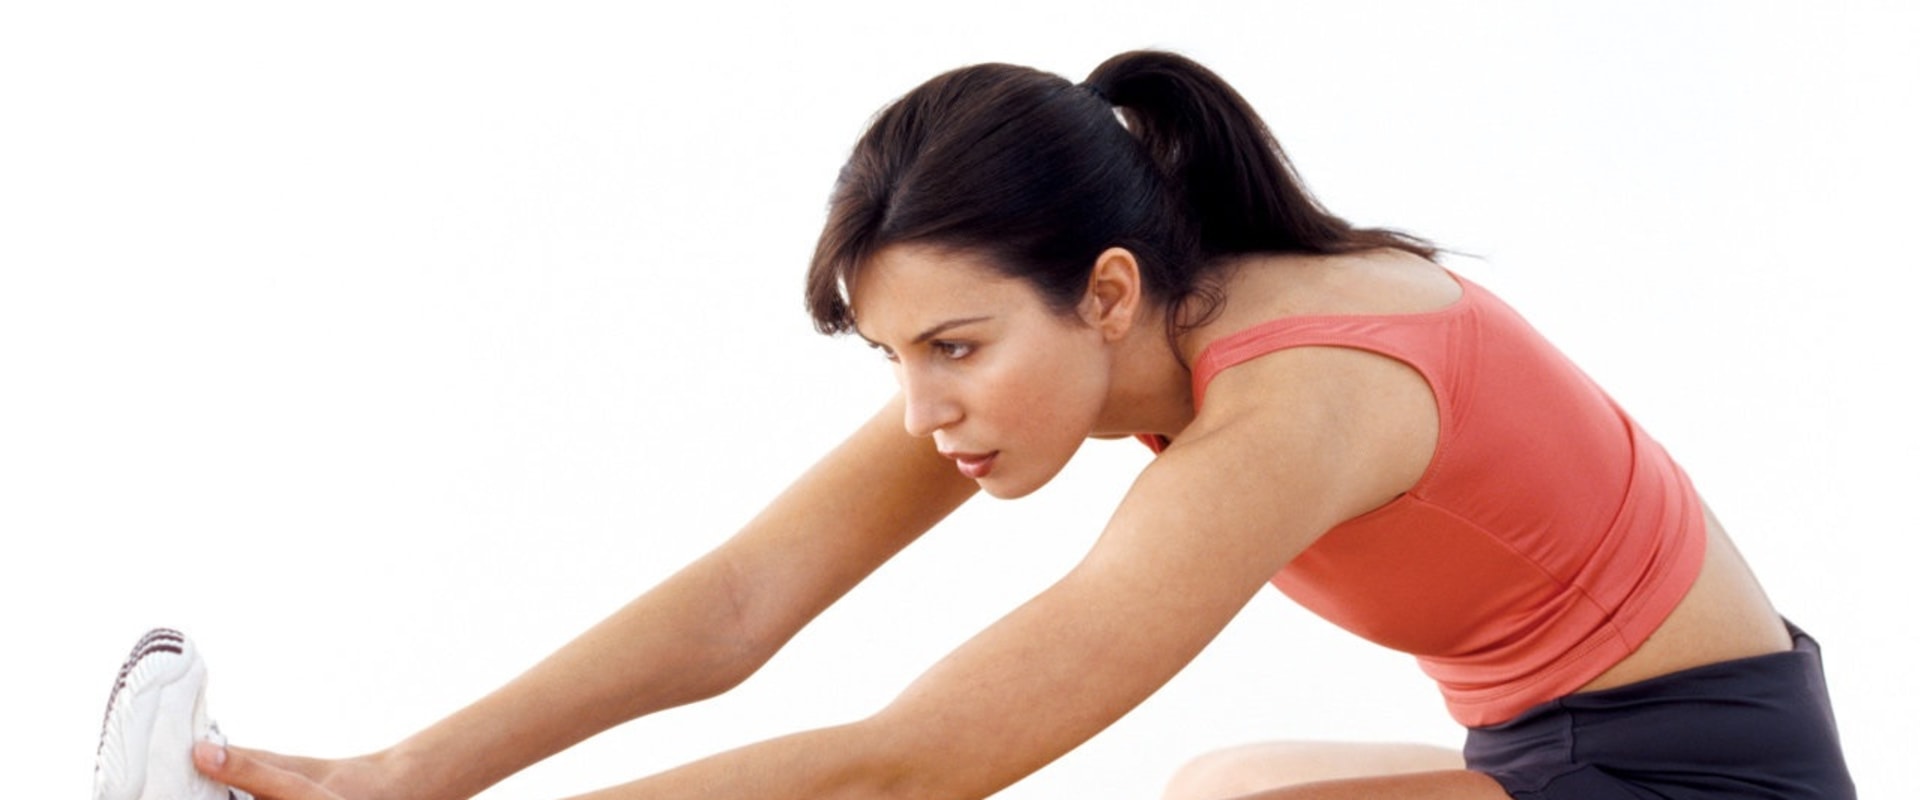 The Benefits of Stretching for Flexibility and Injury Prevention